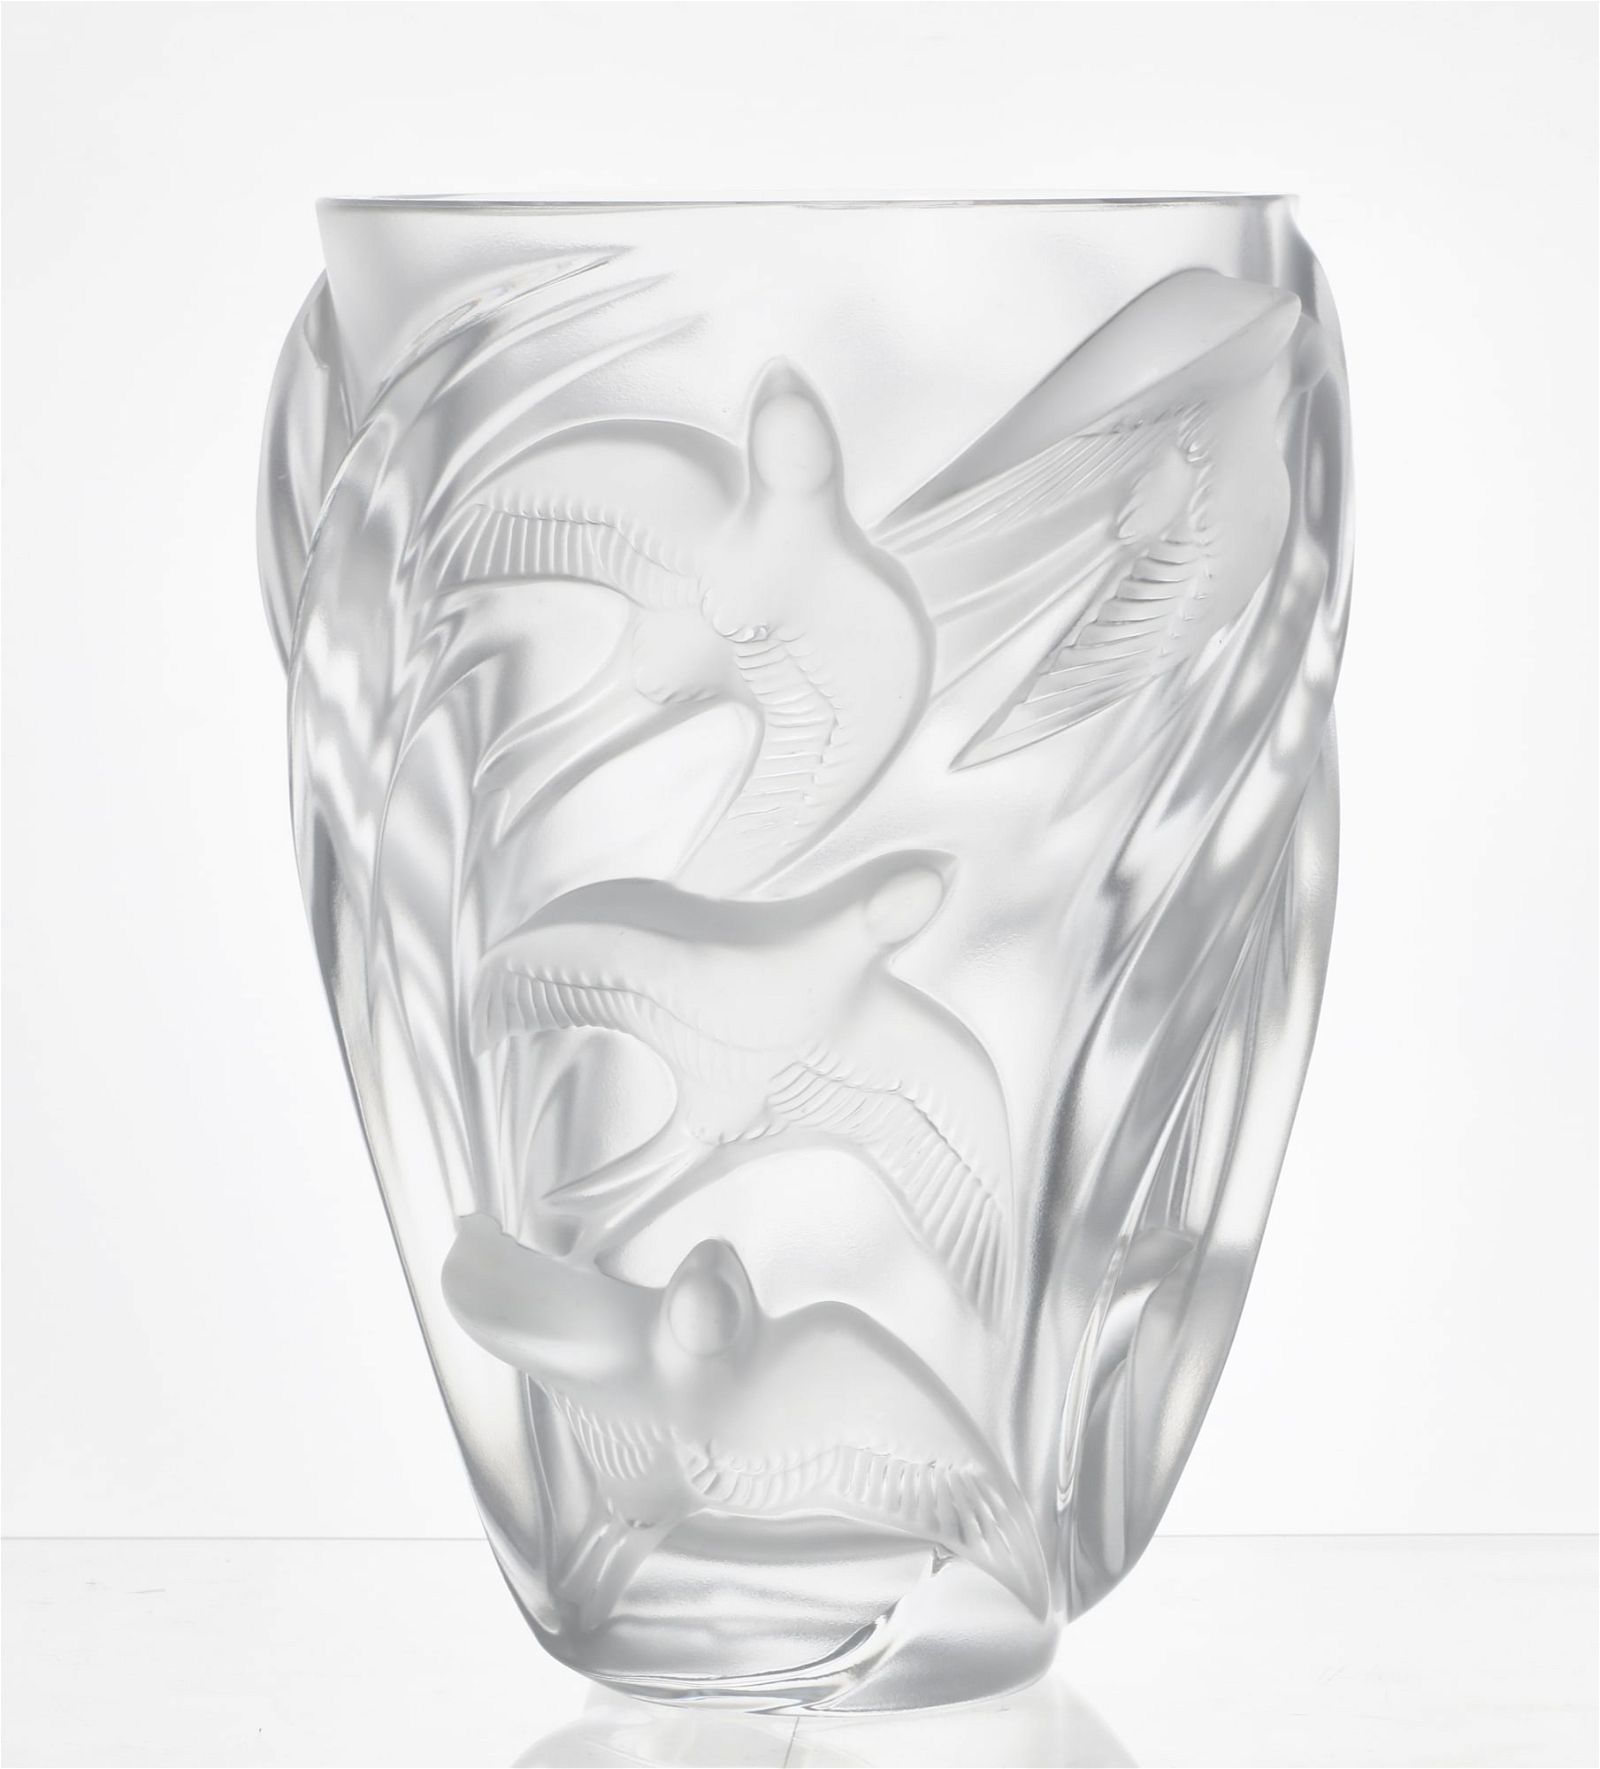 A LALIQUE CLEAR AND FROSTED GLASS 2fb428c